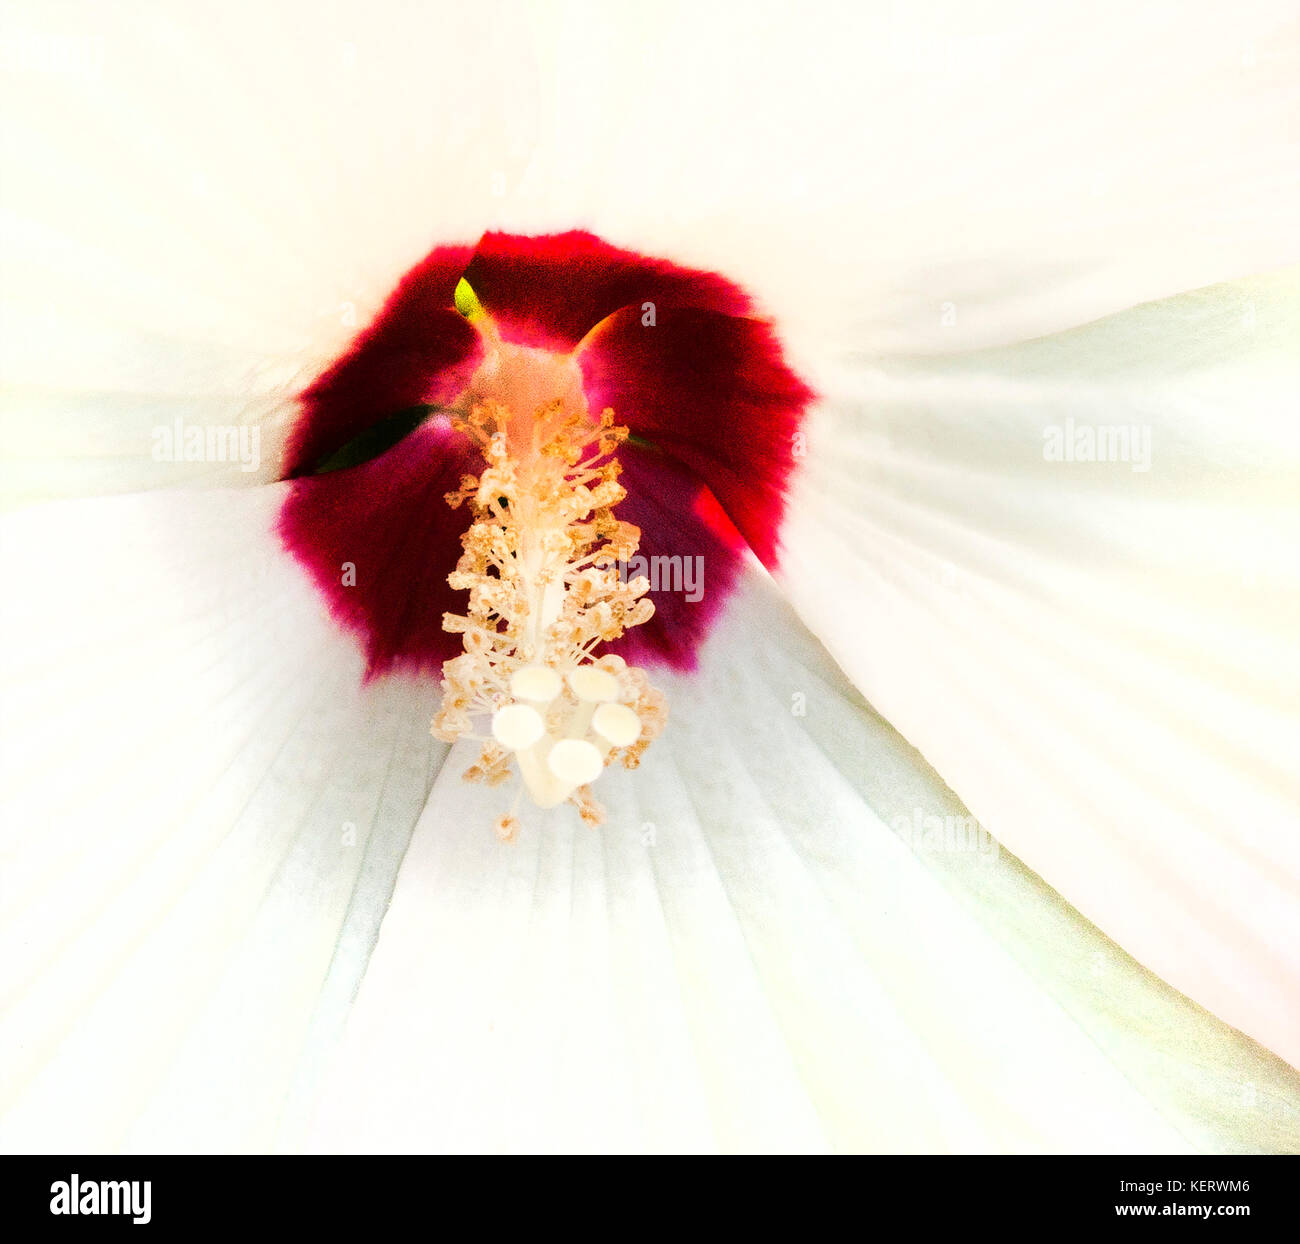 Hibiscus Flower, Red and White Petals Stock Photo